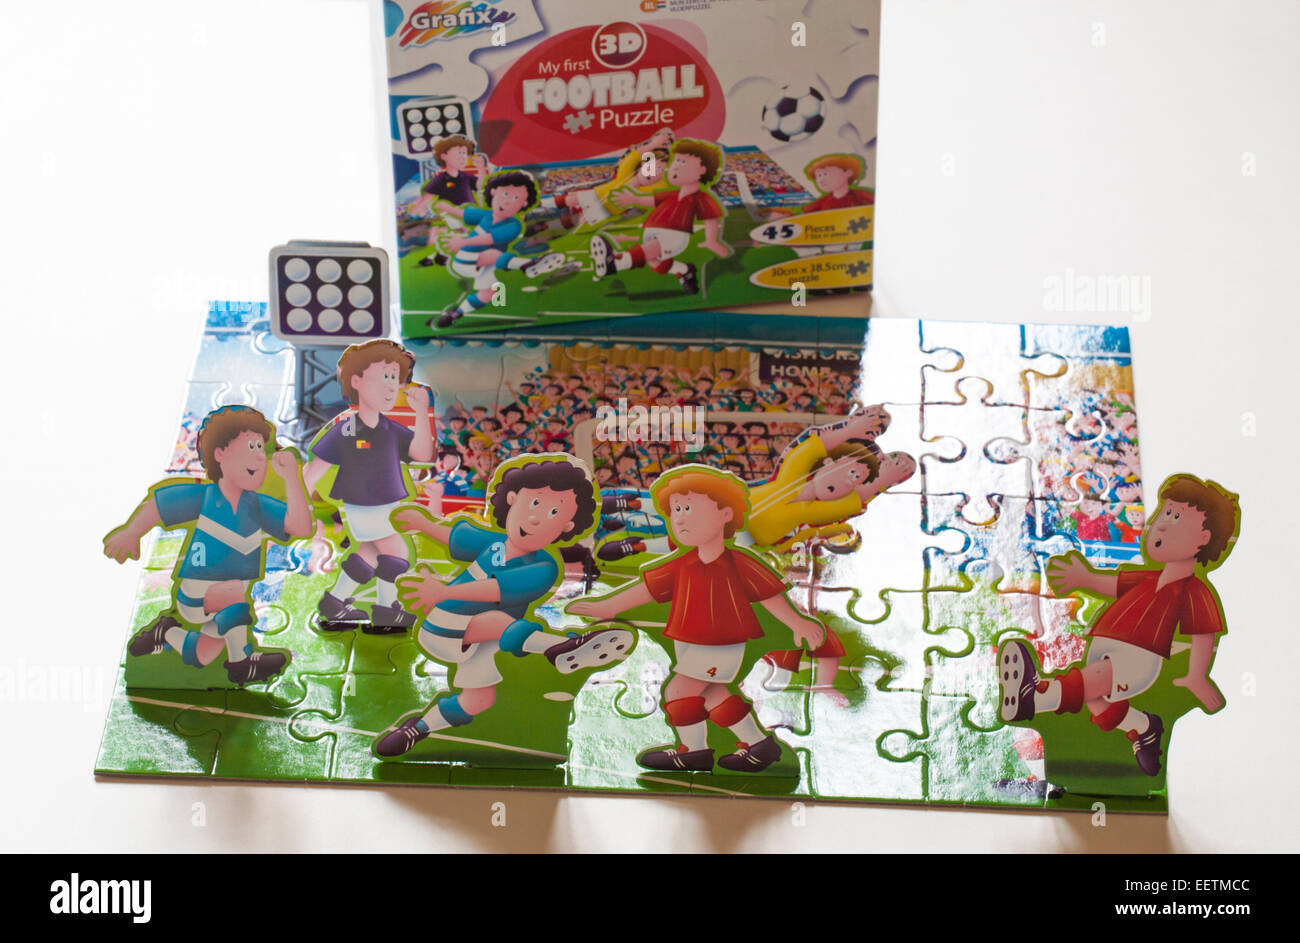 Grafix My first 3D Football jigsaw puzzle with stand up figures and pieces  Stock Photo - Alamy